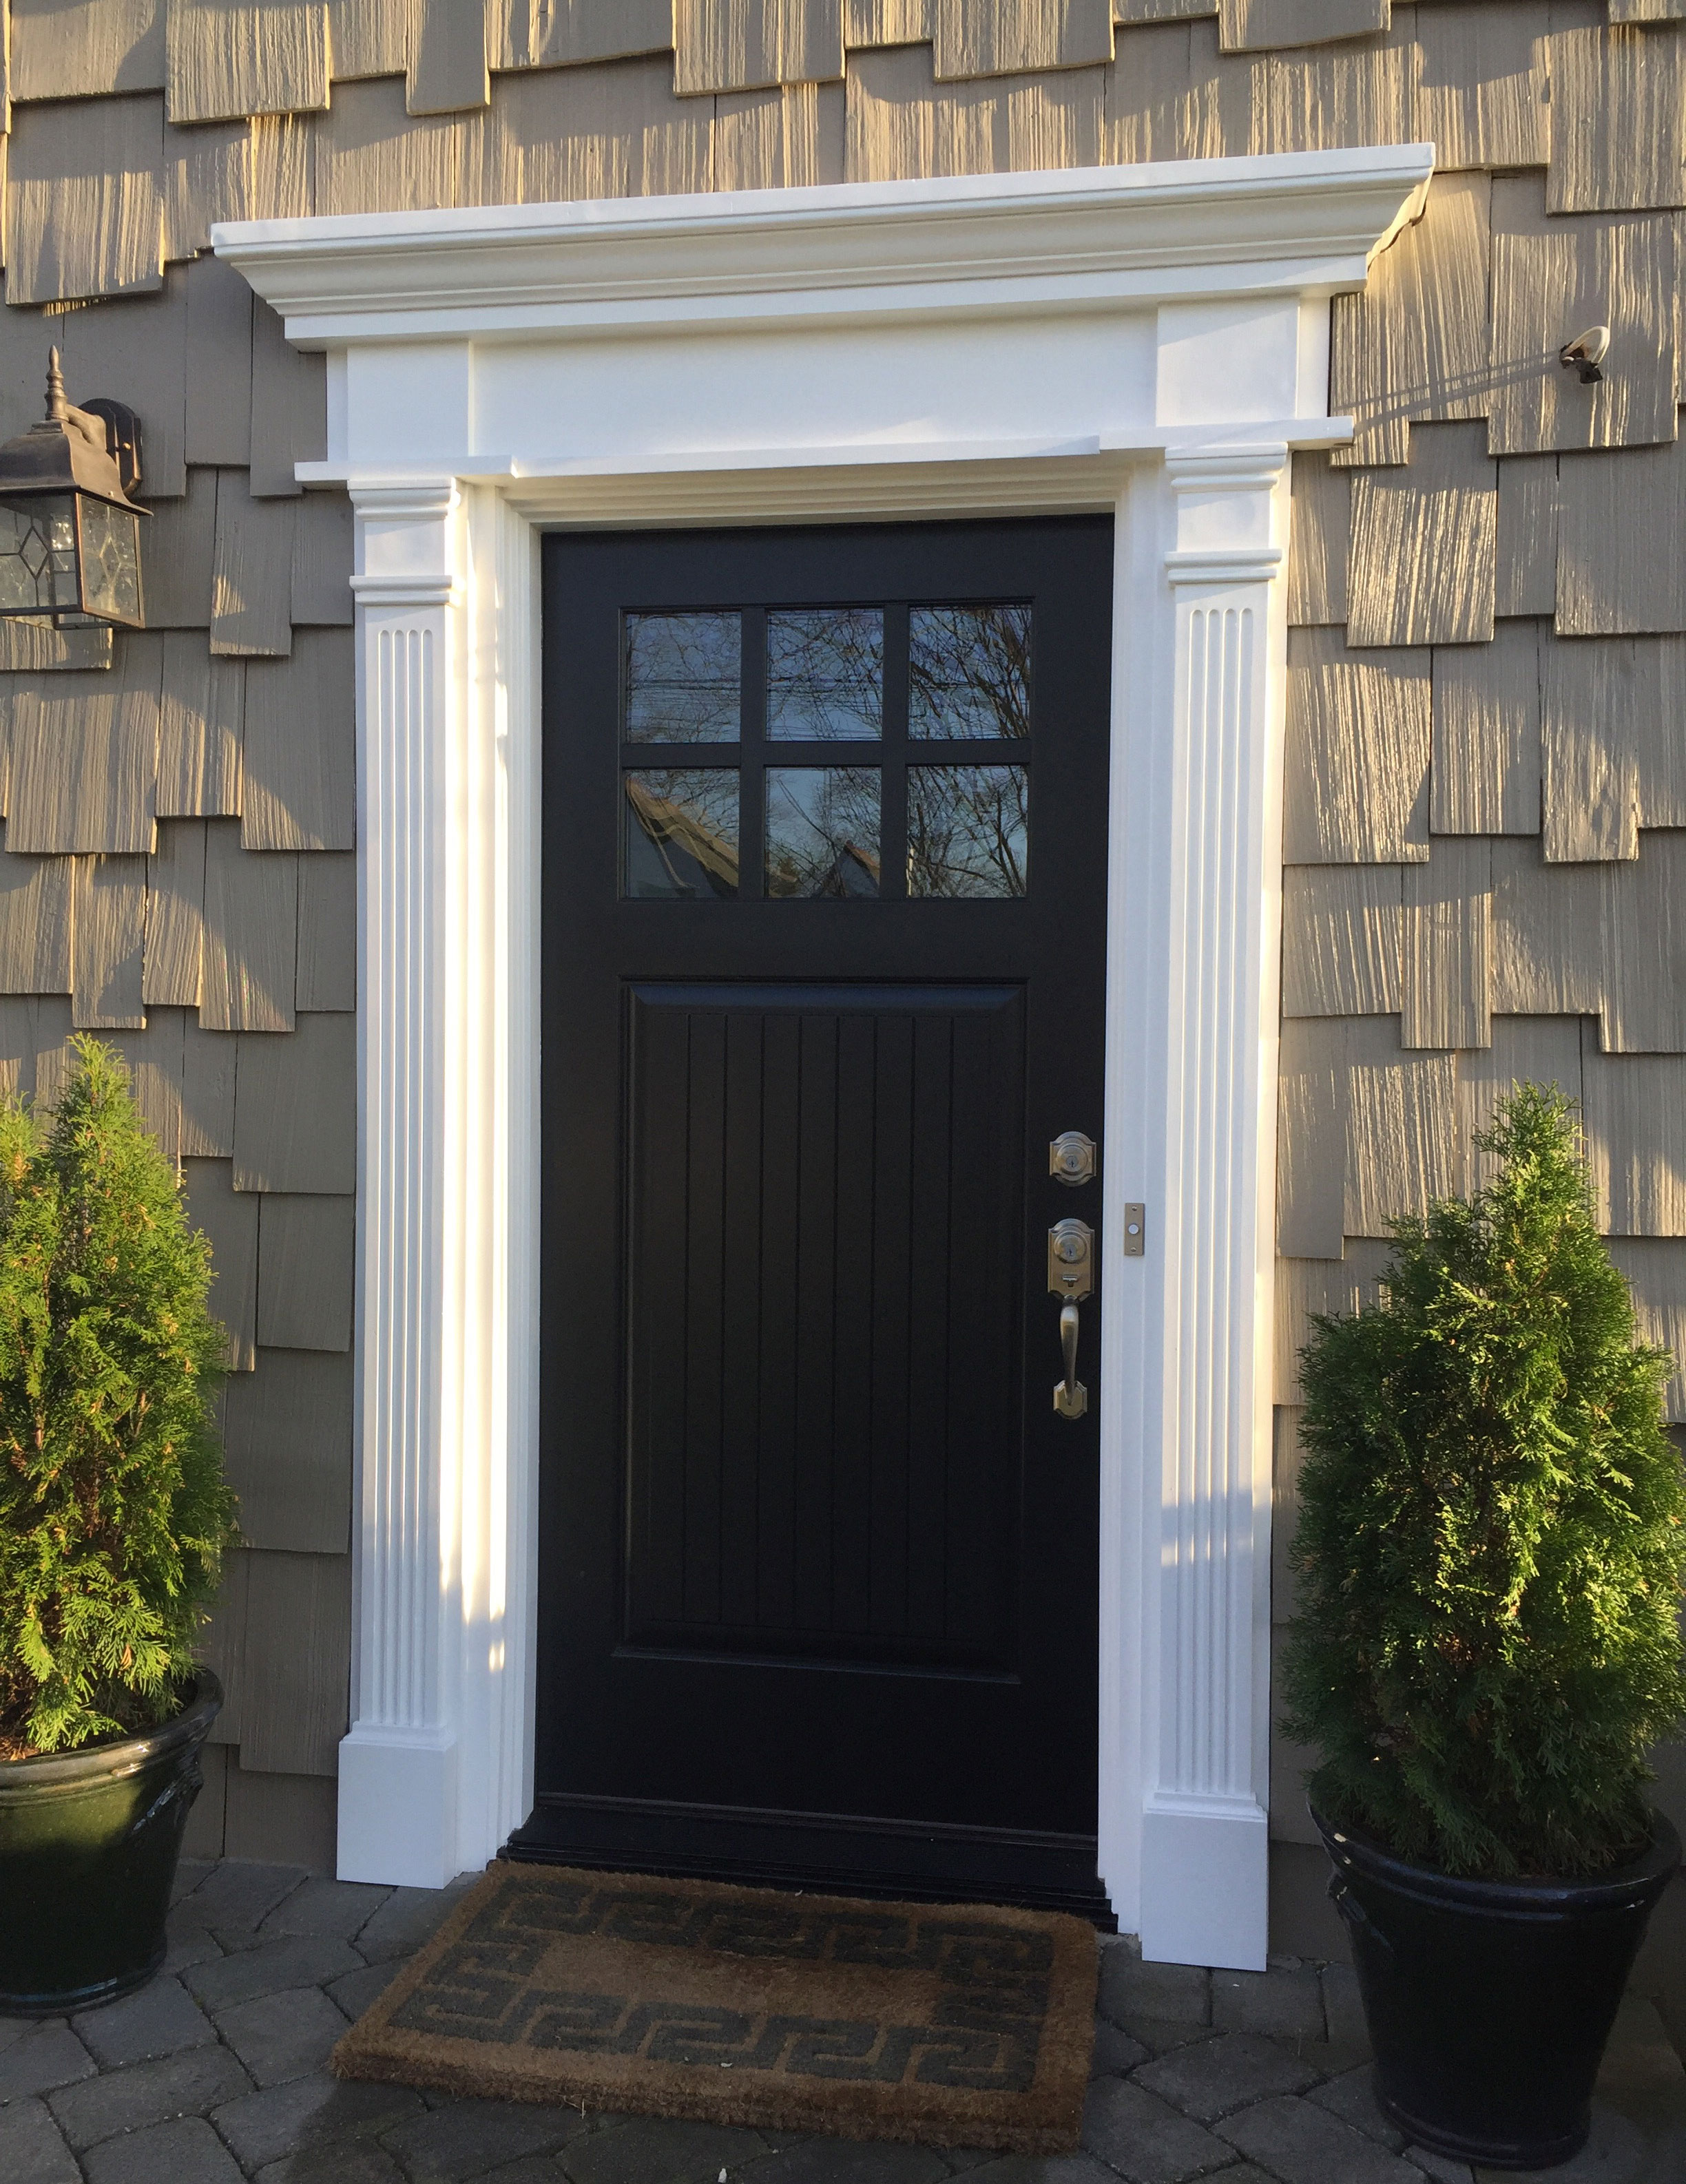 69 Awesome Exterior door trim pictures Info